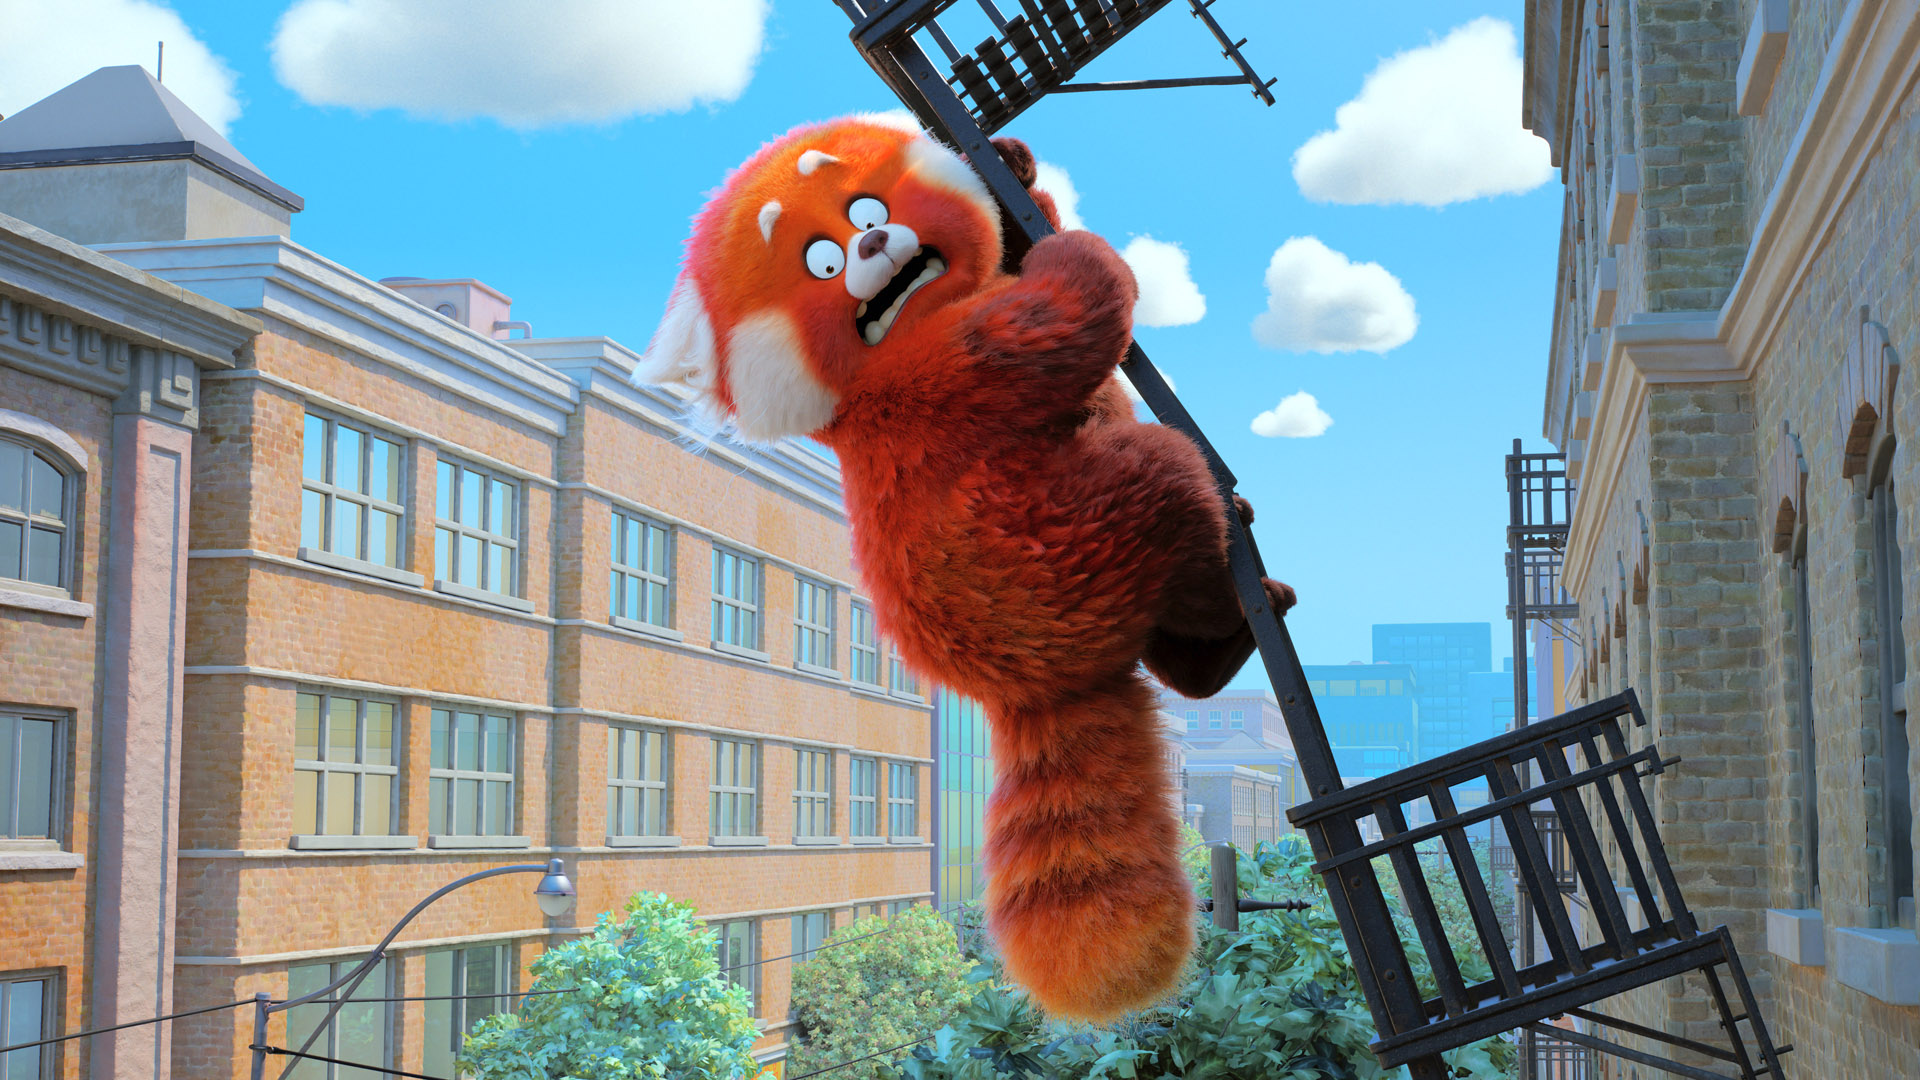 Mei's red panda form struggles to navigate early 2000s Toronto in Turning Red